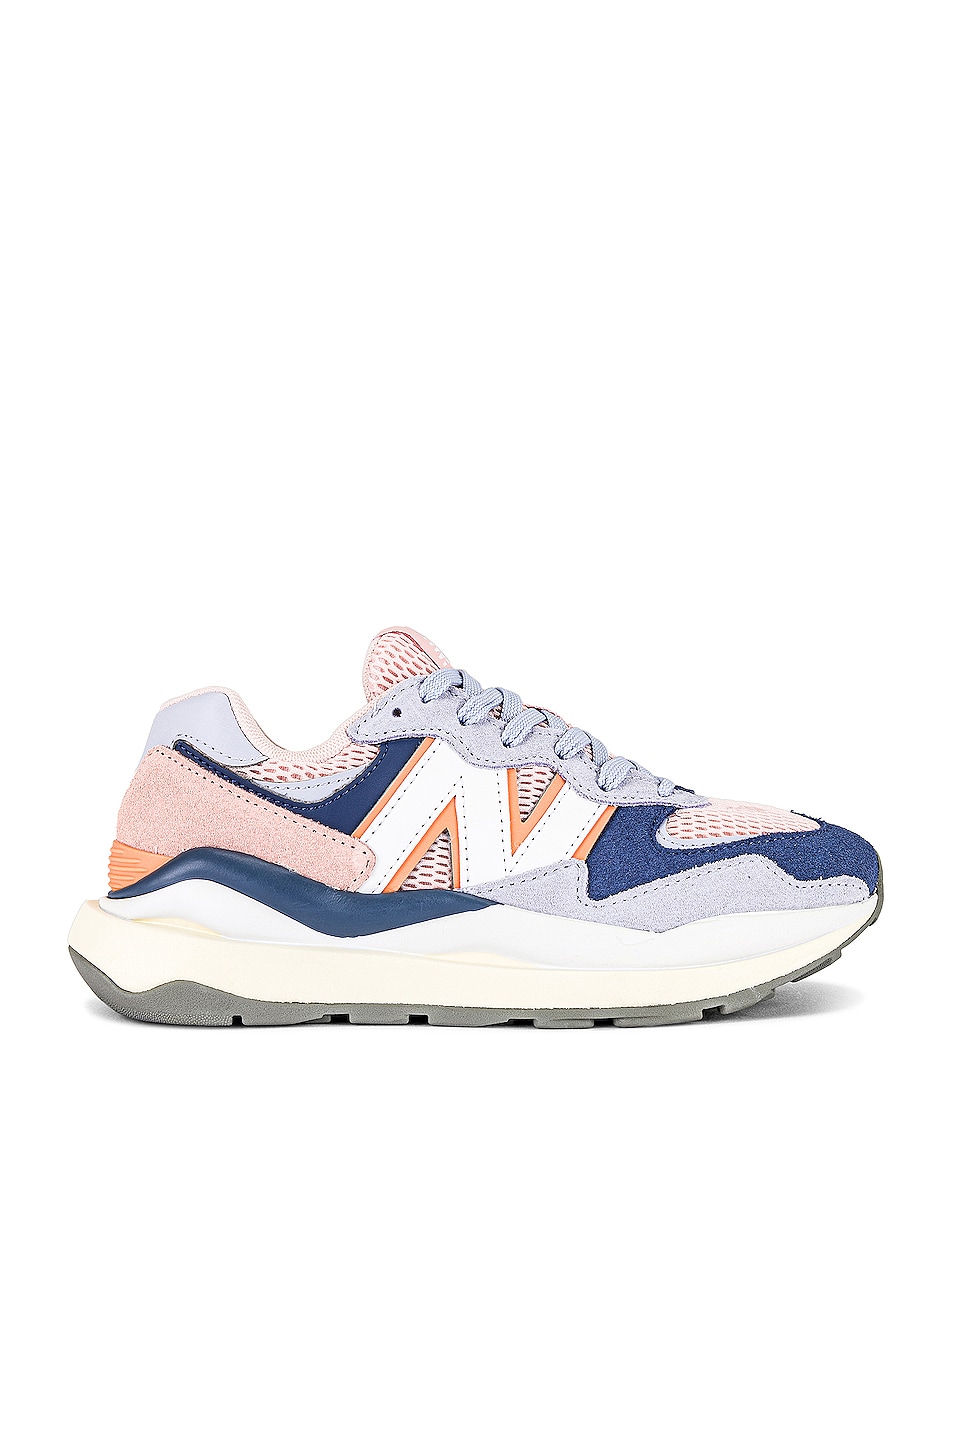 Image 1 of New Balance 57/40 Sneakers in Pink Haze & Night Air